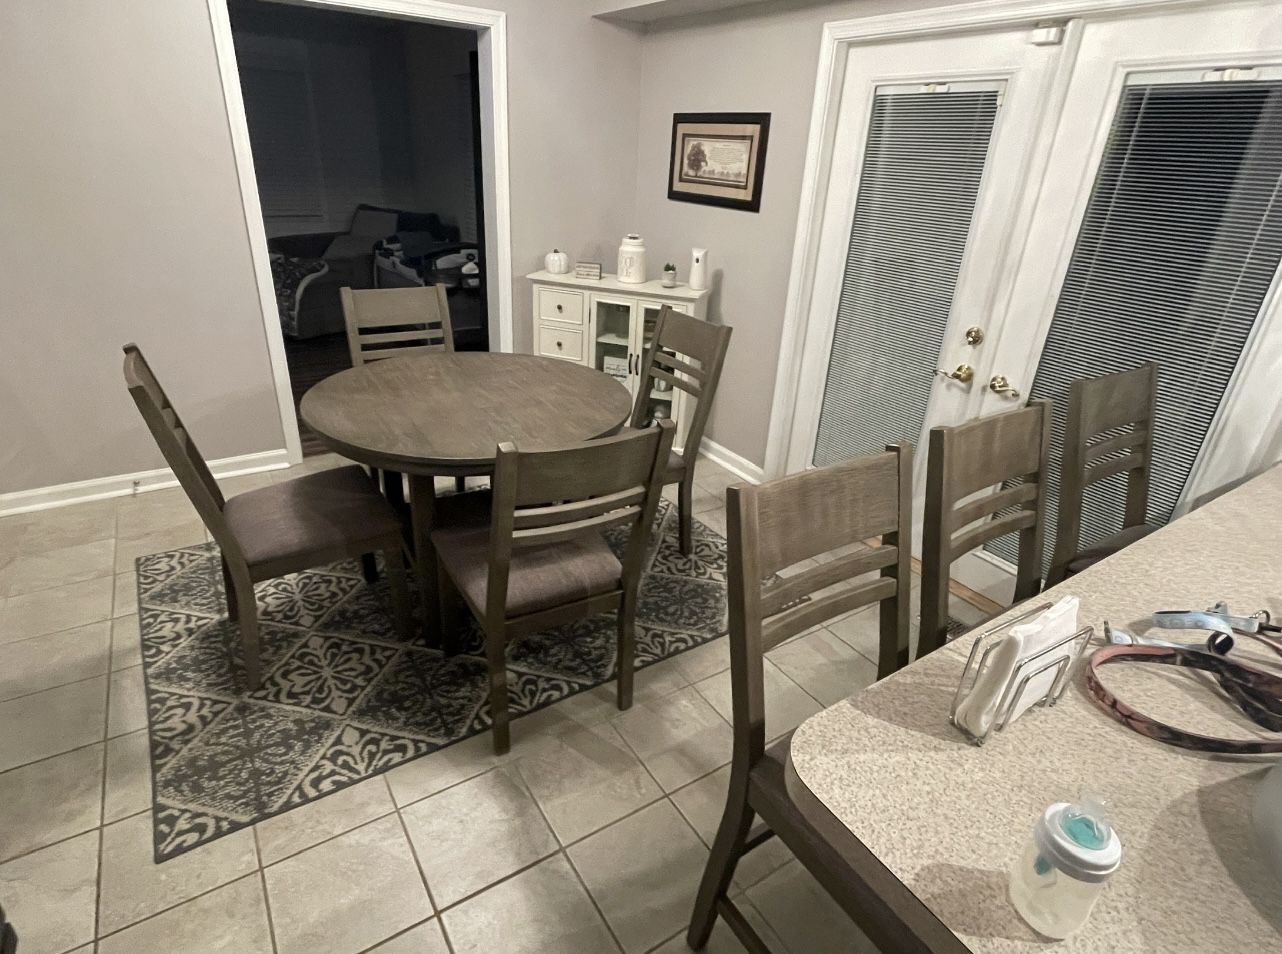 Brand New Dining Table With Chairs And Stools